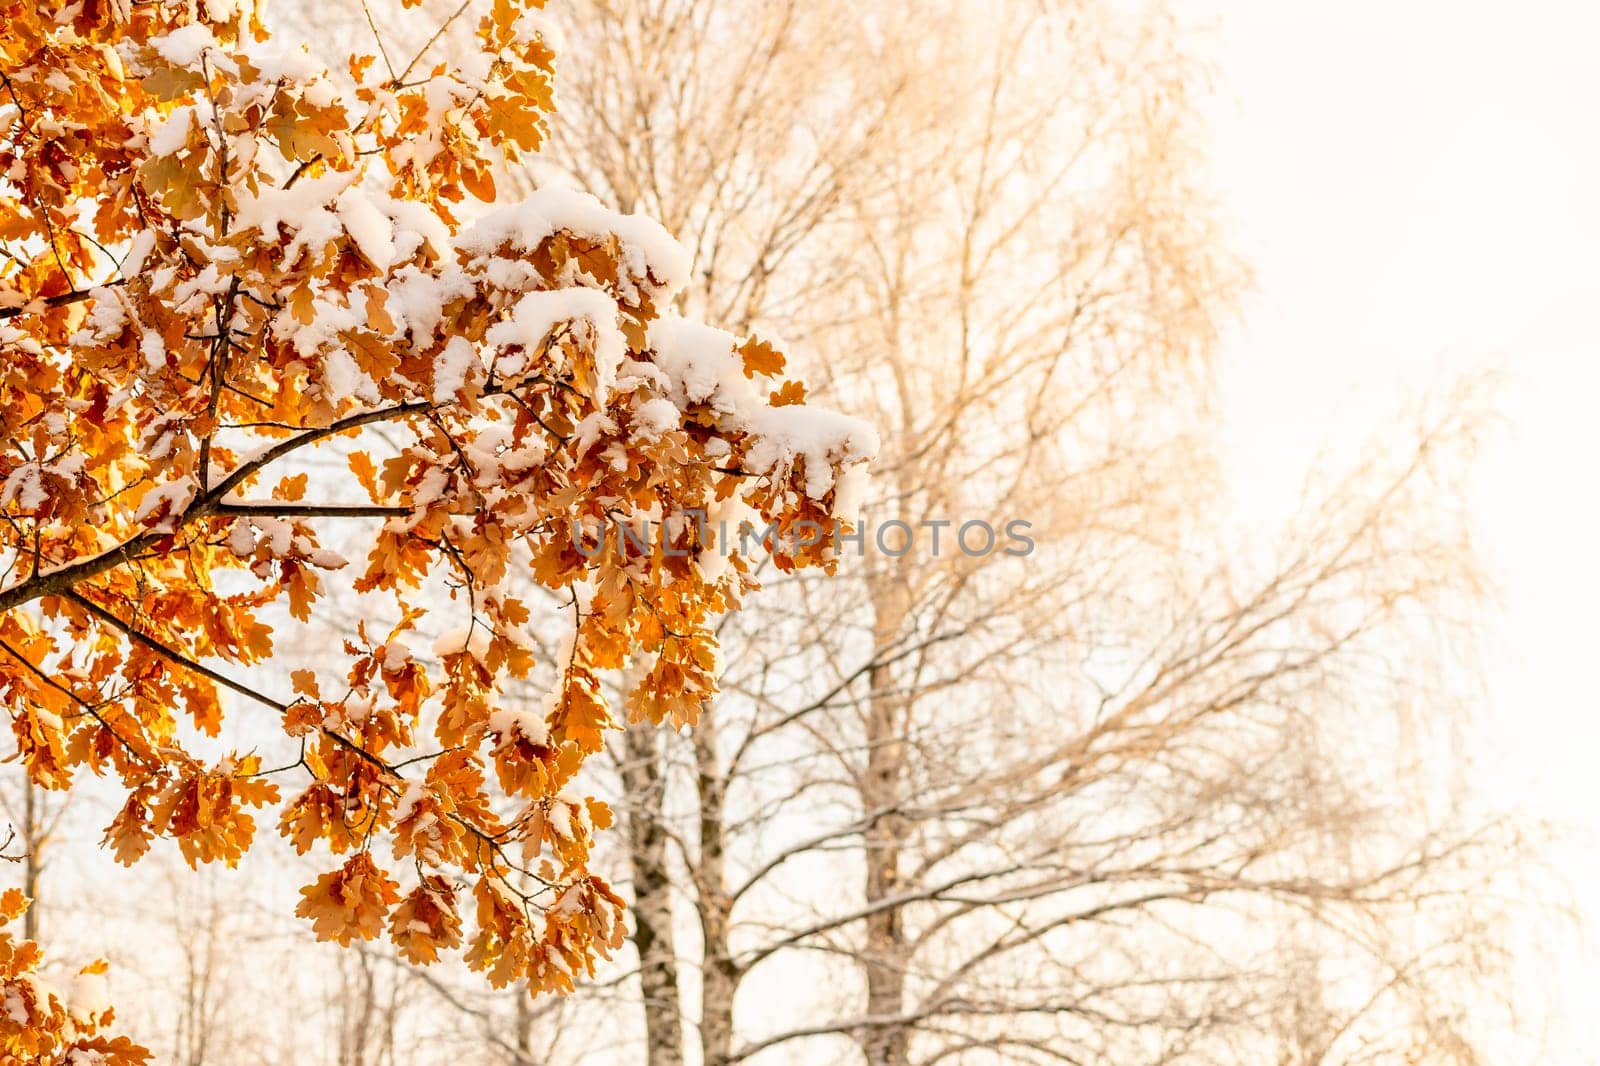 Dry oak leaves on a branch in the winter forest. Sunset illuminates dry oak leaves in the winter forest.Snow-covered branches.Colorful natural landscape. by YuliaYaspe1979